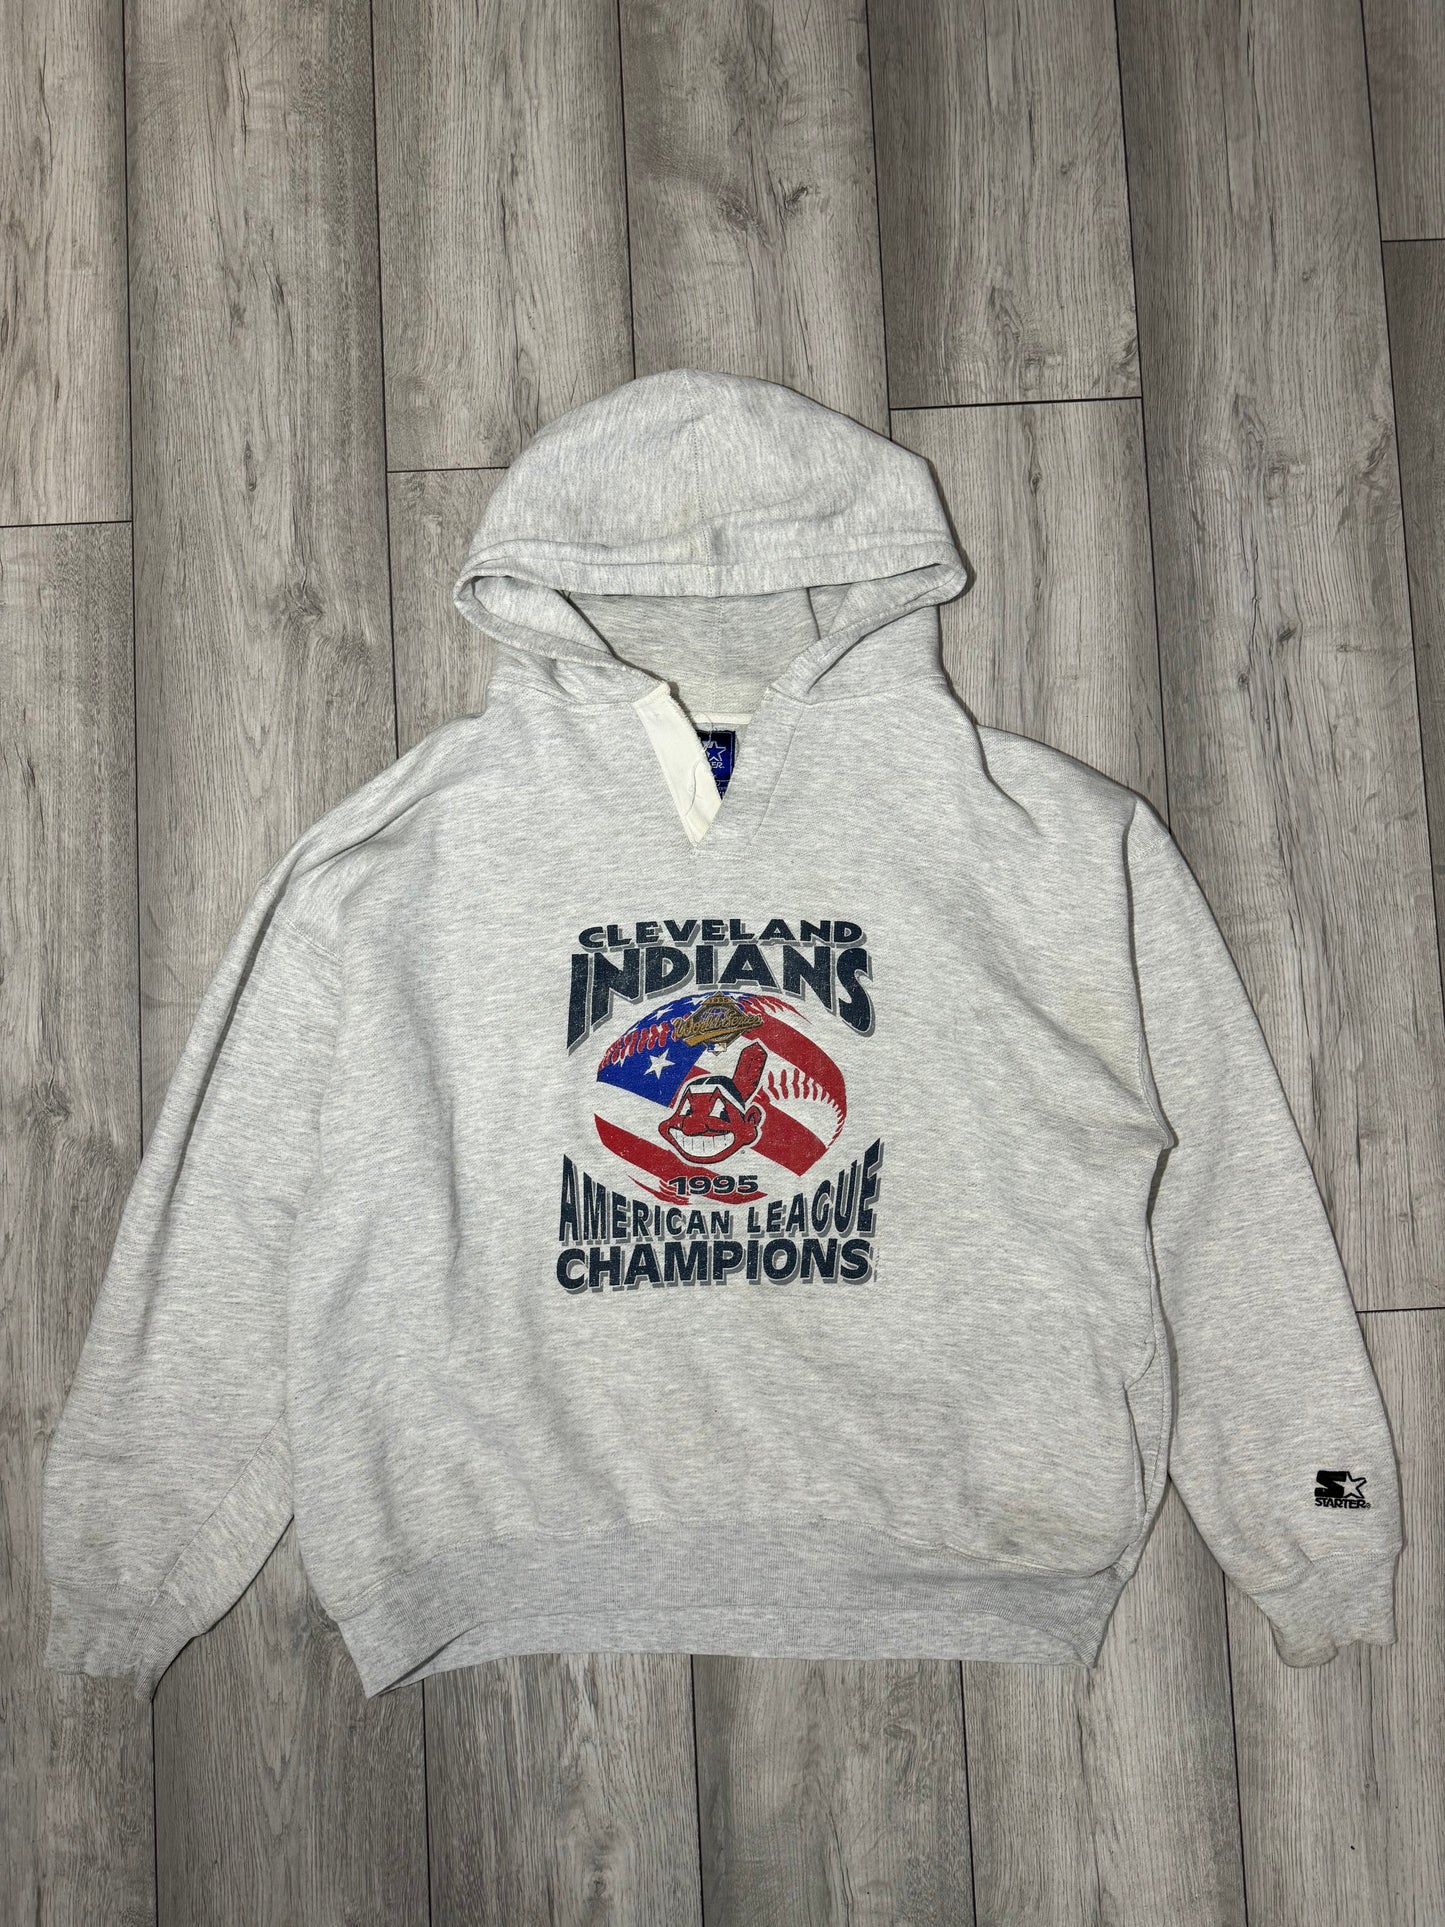 Vintage 1995 Cleveland Indians American League Champions Hoodie